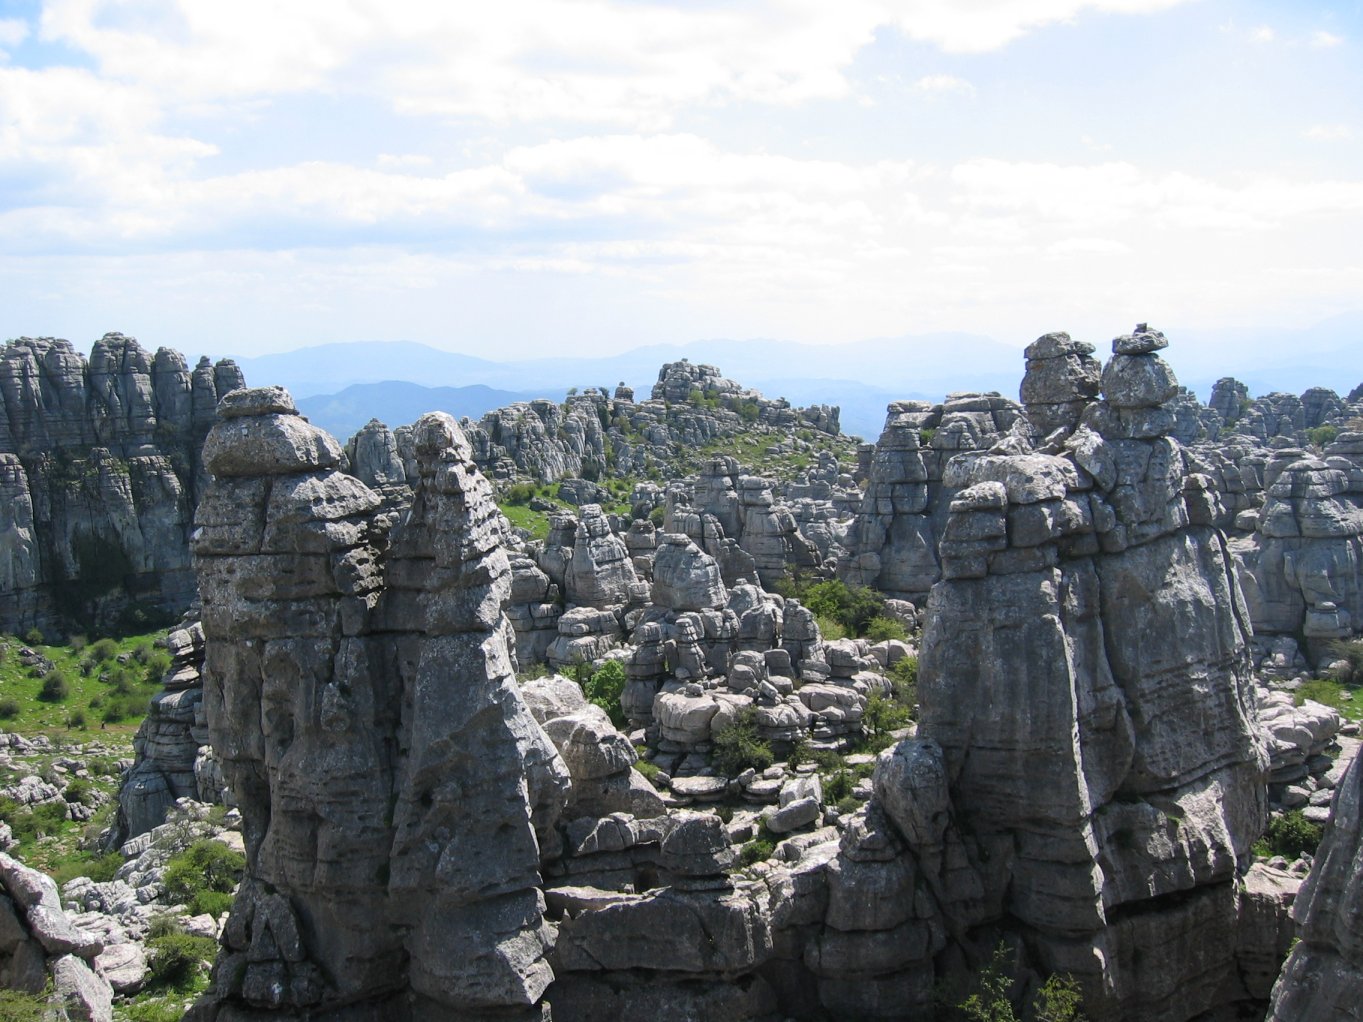 http://www.pvv.org/~erikad/Themepages/Travel/Andalucia/general/torcal.jpg